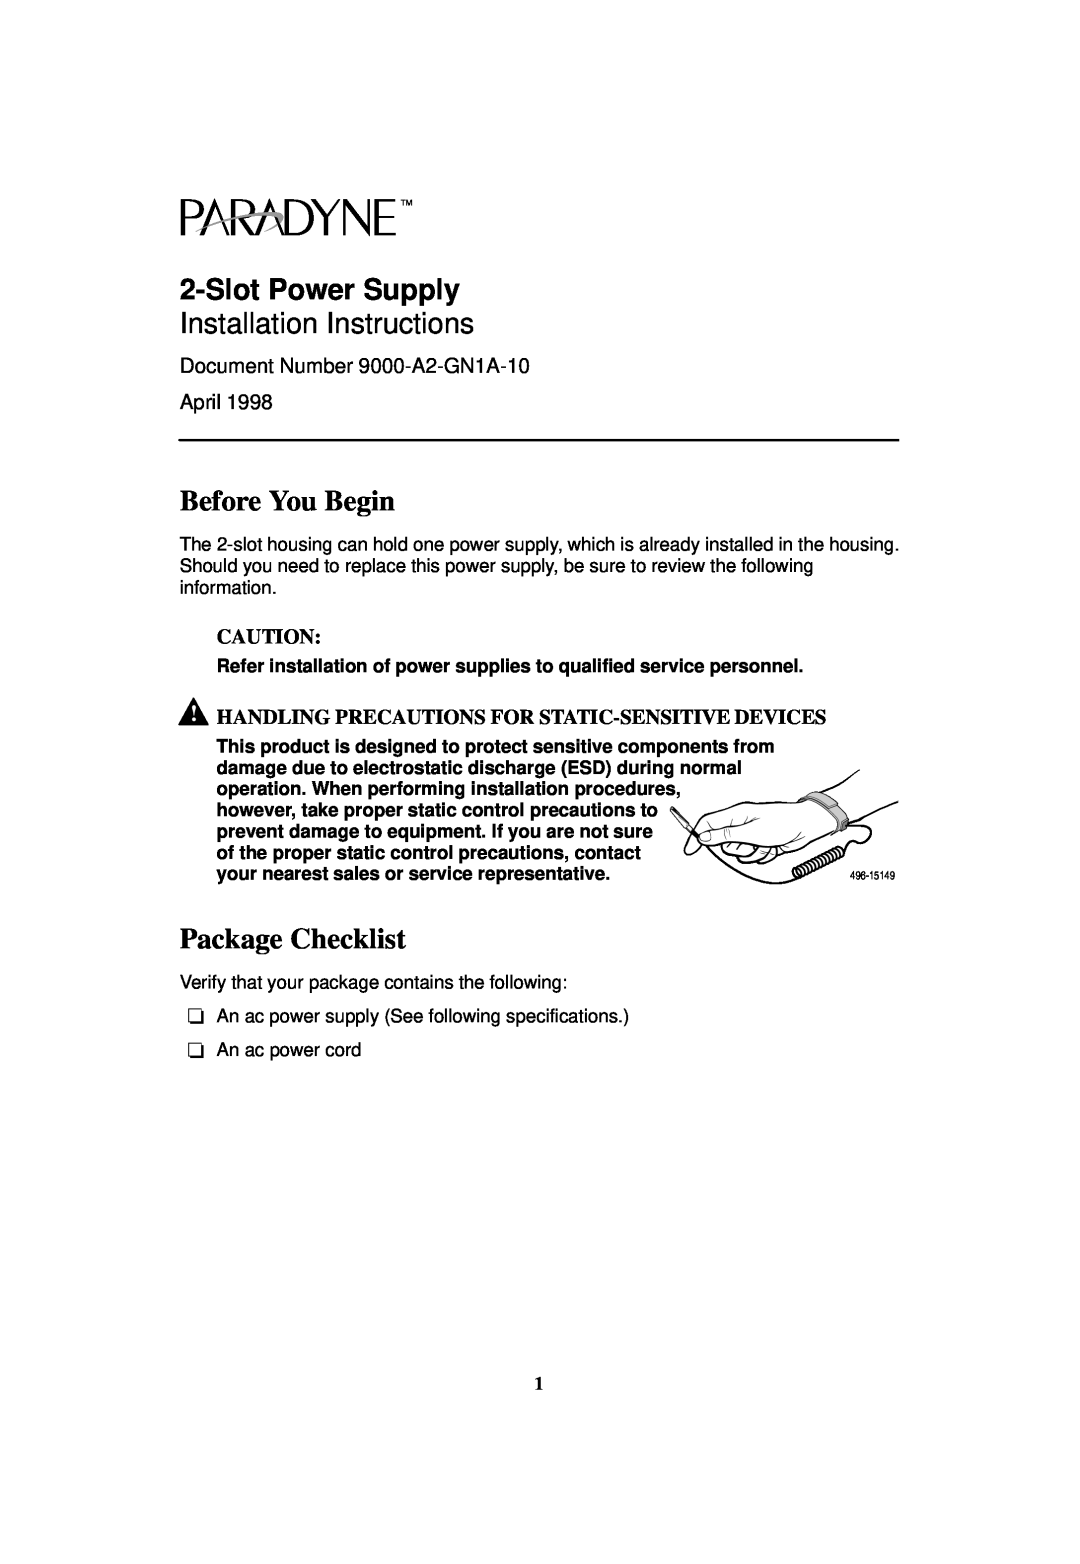 Paradyne 496-15149 installation instructions Before You Begin, Package Checklist, Slot Power Supply 